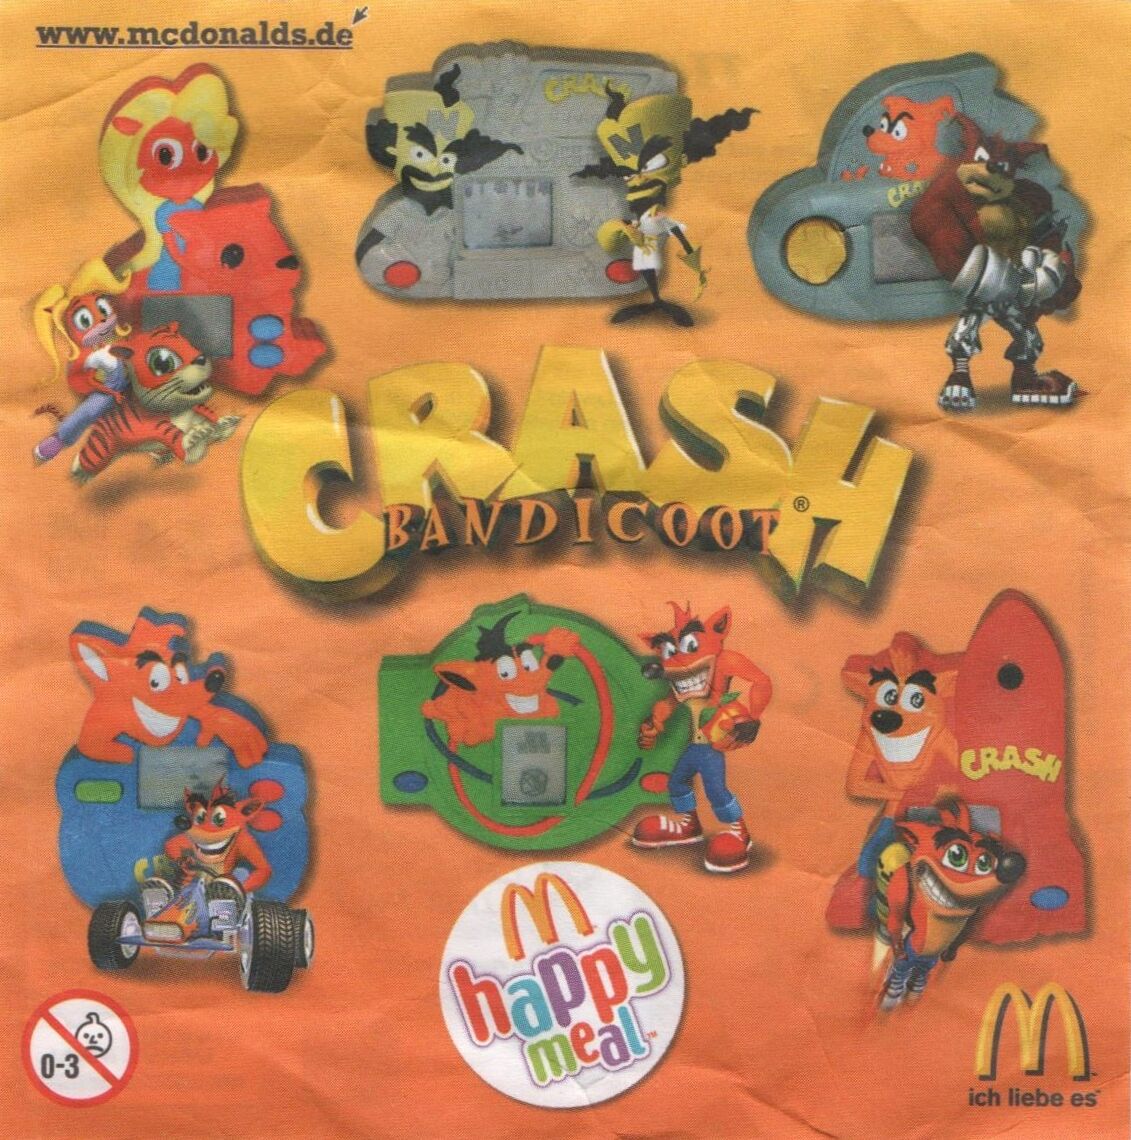 I got the new crash bandicoot card game from mcdonalds! : r